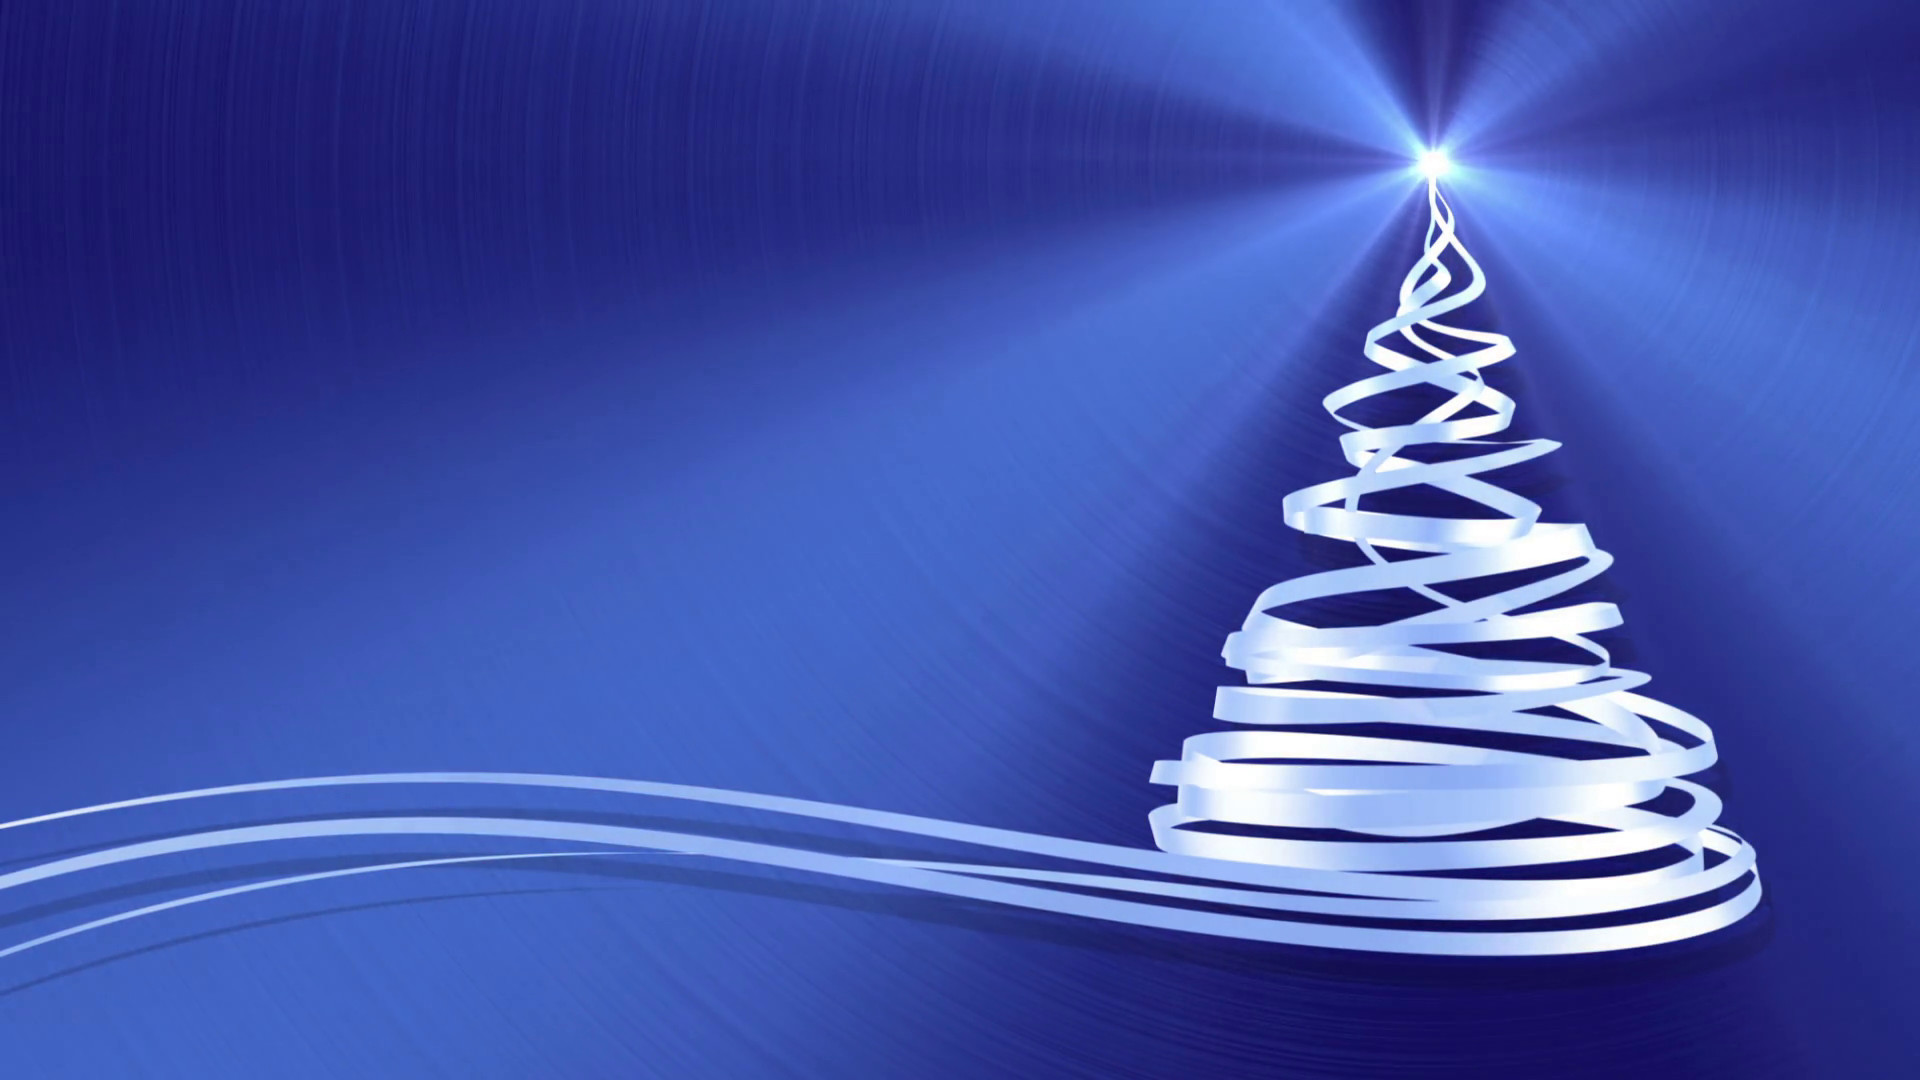 1920x1080 Christmas Tree From White Tapes Over Blue Metal Background. 3D Animation.  Motion Background - Storyblocks Video